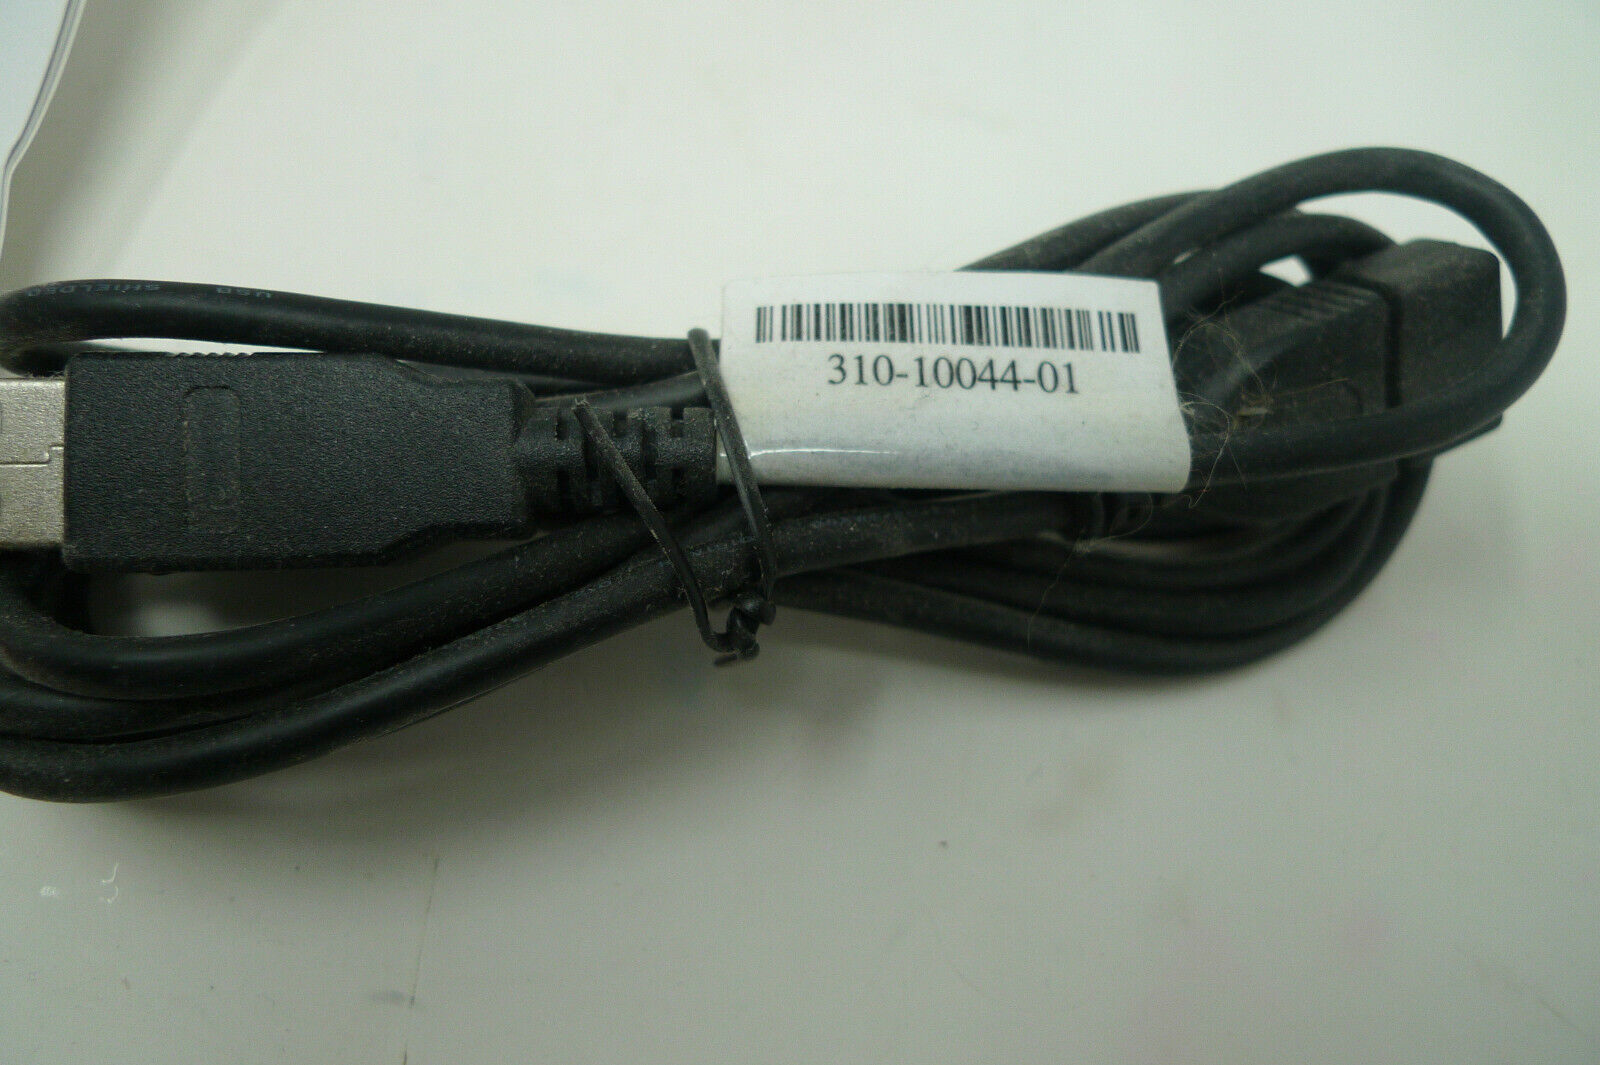 USB 2.0 Extension Cable with cradle and Fastener Echostar